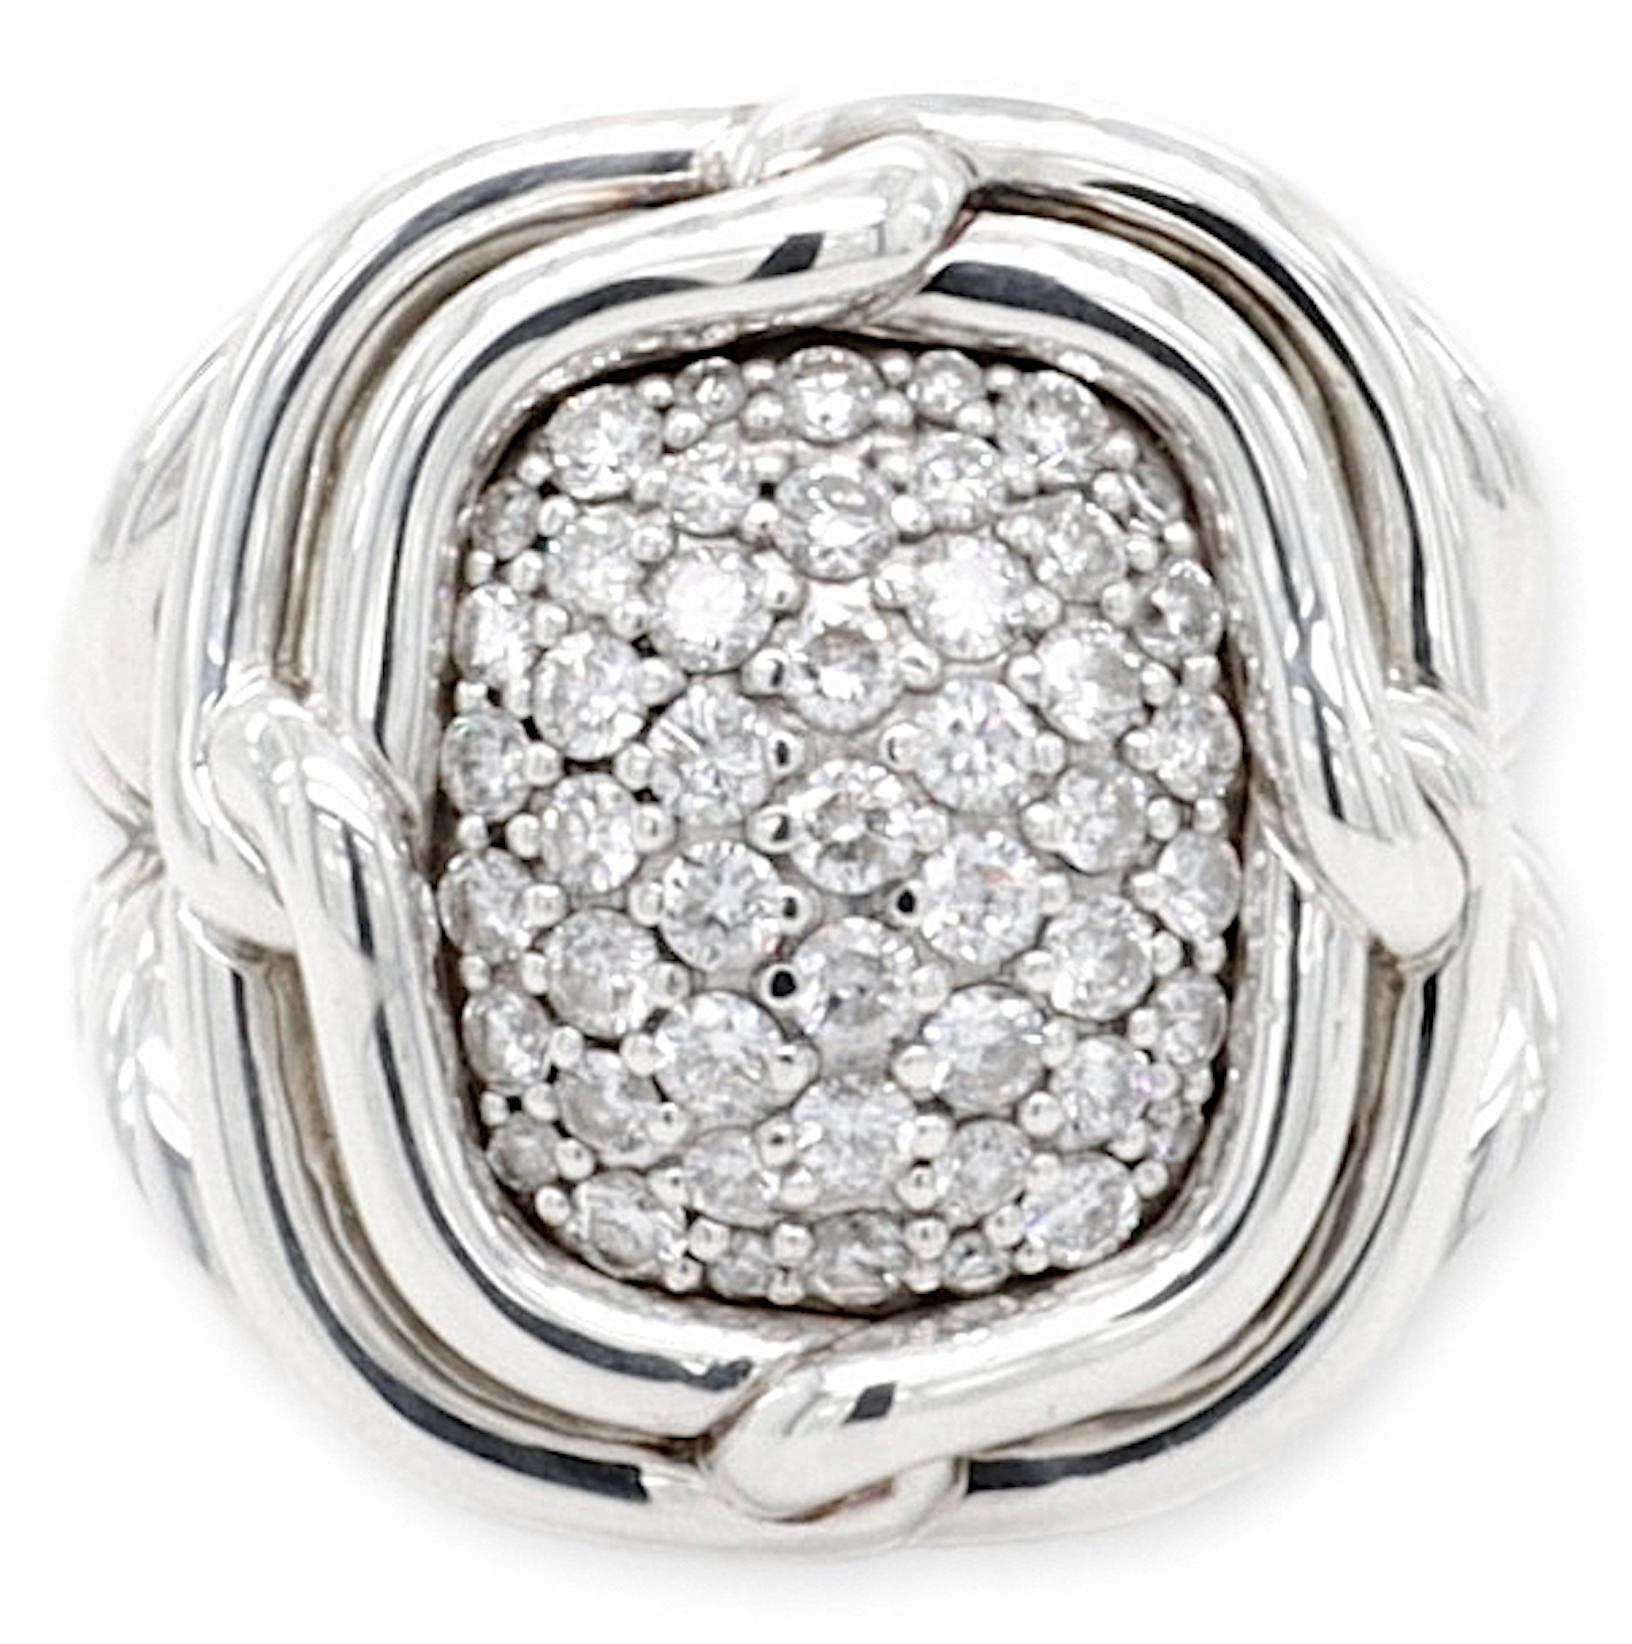 David Yurman Labyrinth Sterling Silver 1.00 Ct. Pave Diamond Ring In Good Condition For Sale In New York, NY